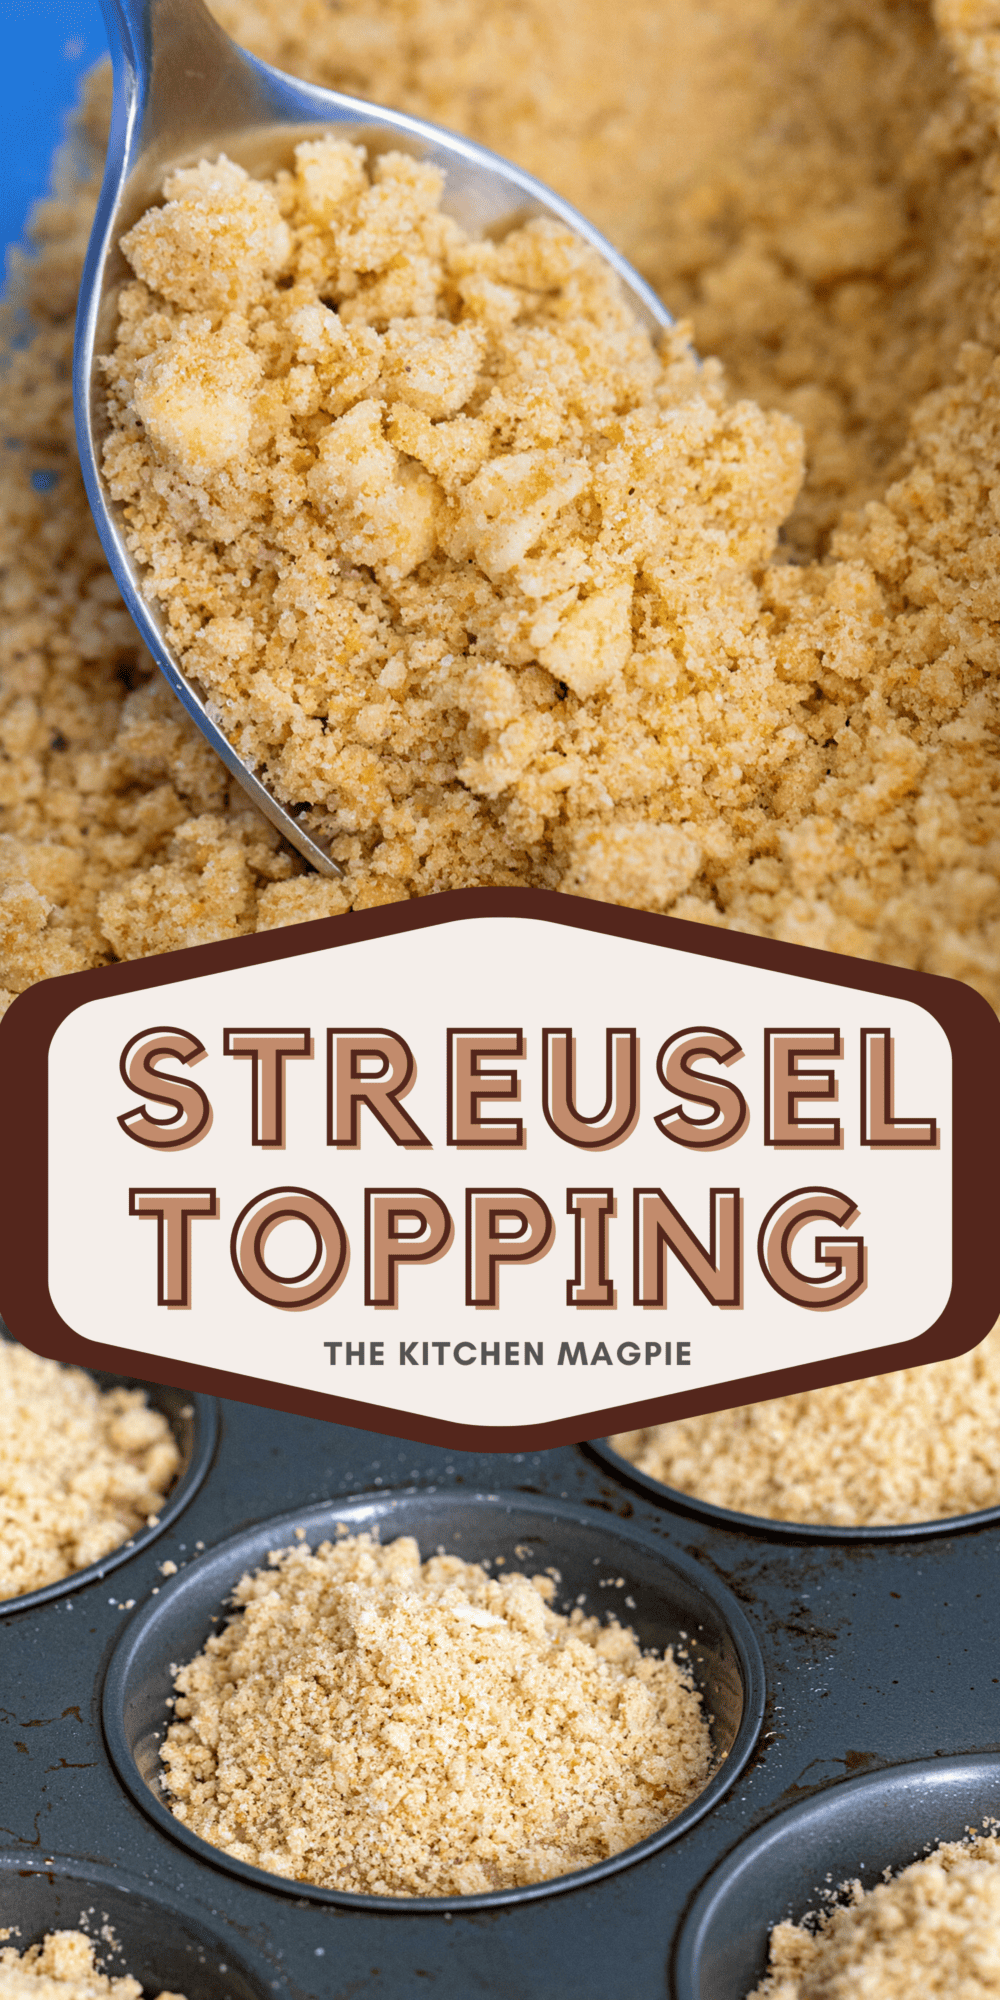 How to make a classic streusel crumb topping for cakes and muffins. This yields enough to top 24 muffins or a large cake.